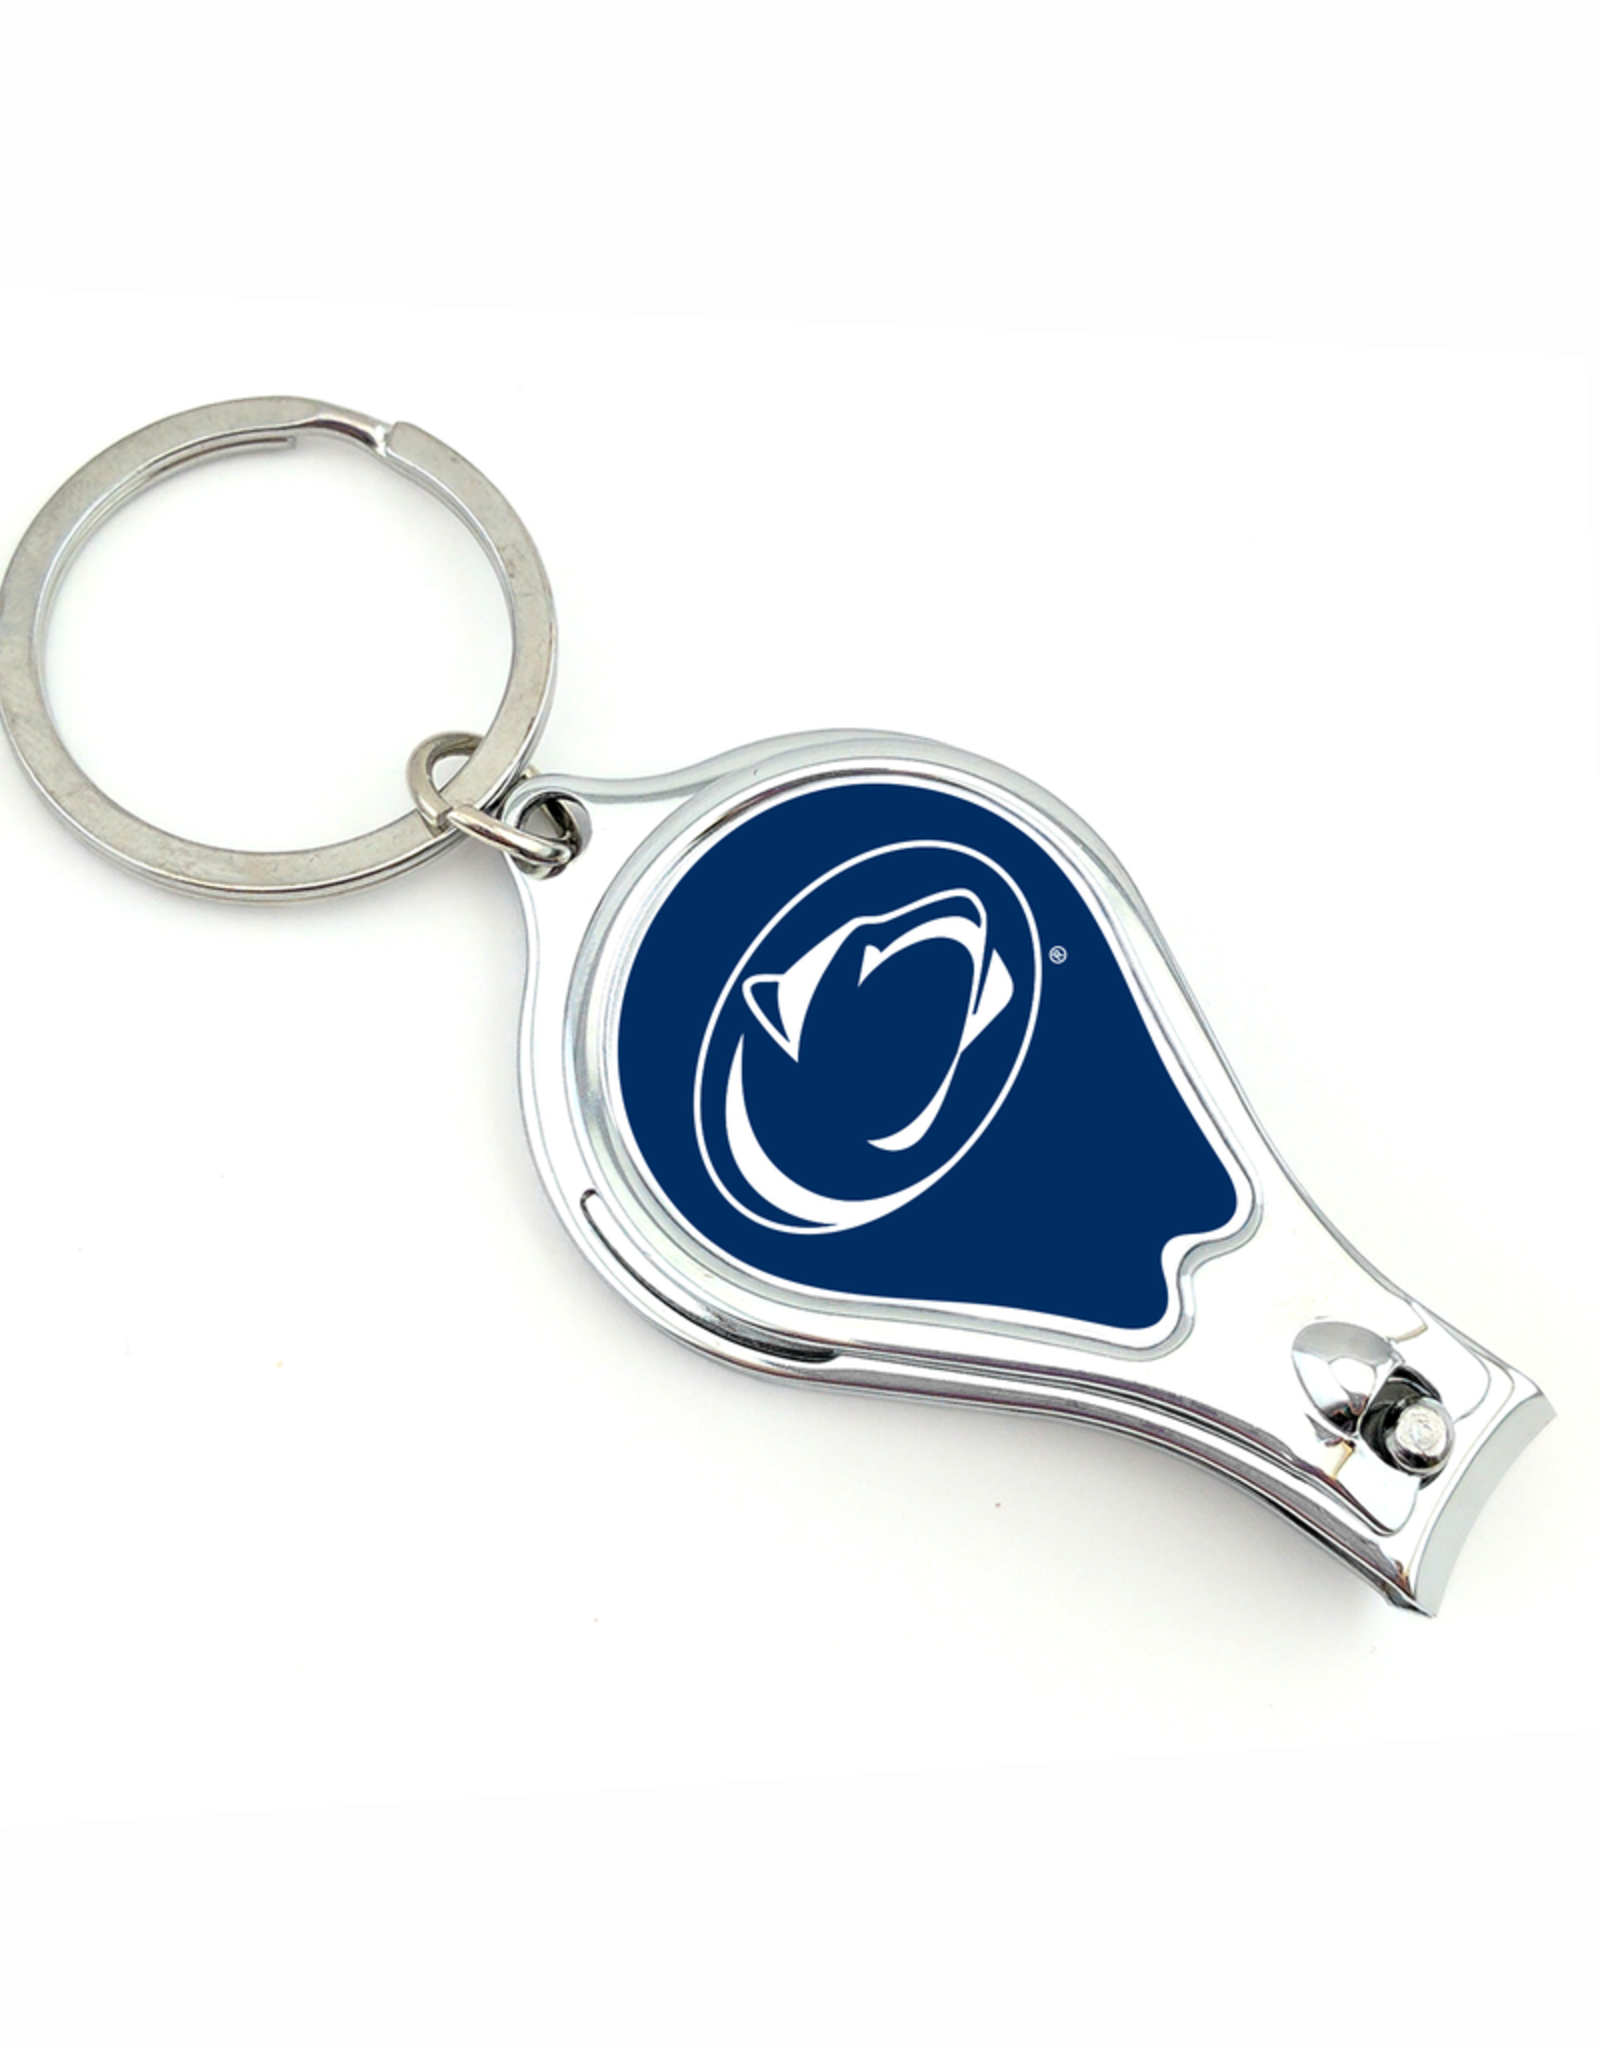 WORTHY PROMOTIONAL PRODUCTS Penn State Nittany Lions Multi Function Key Ring